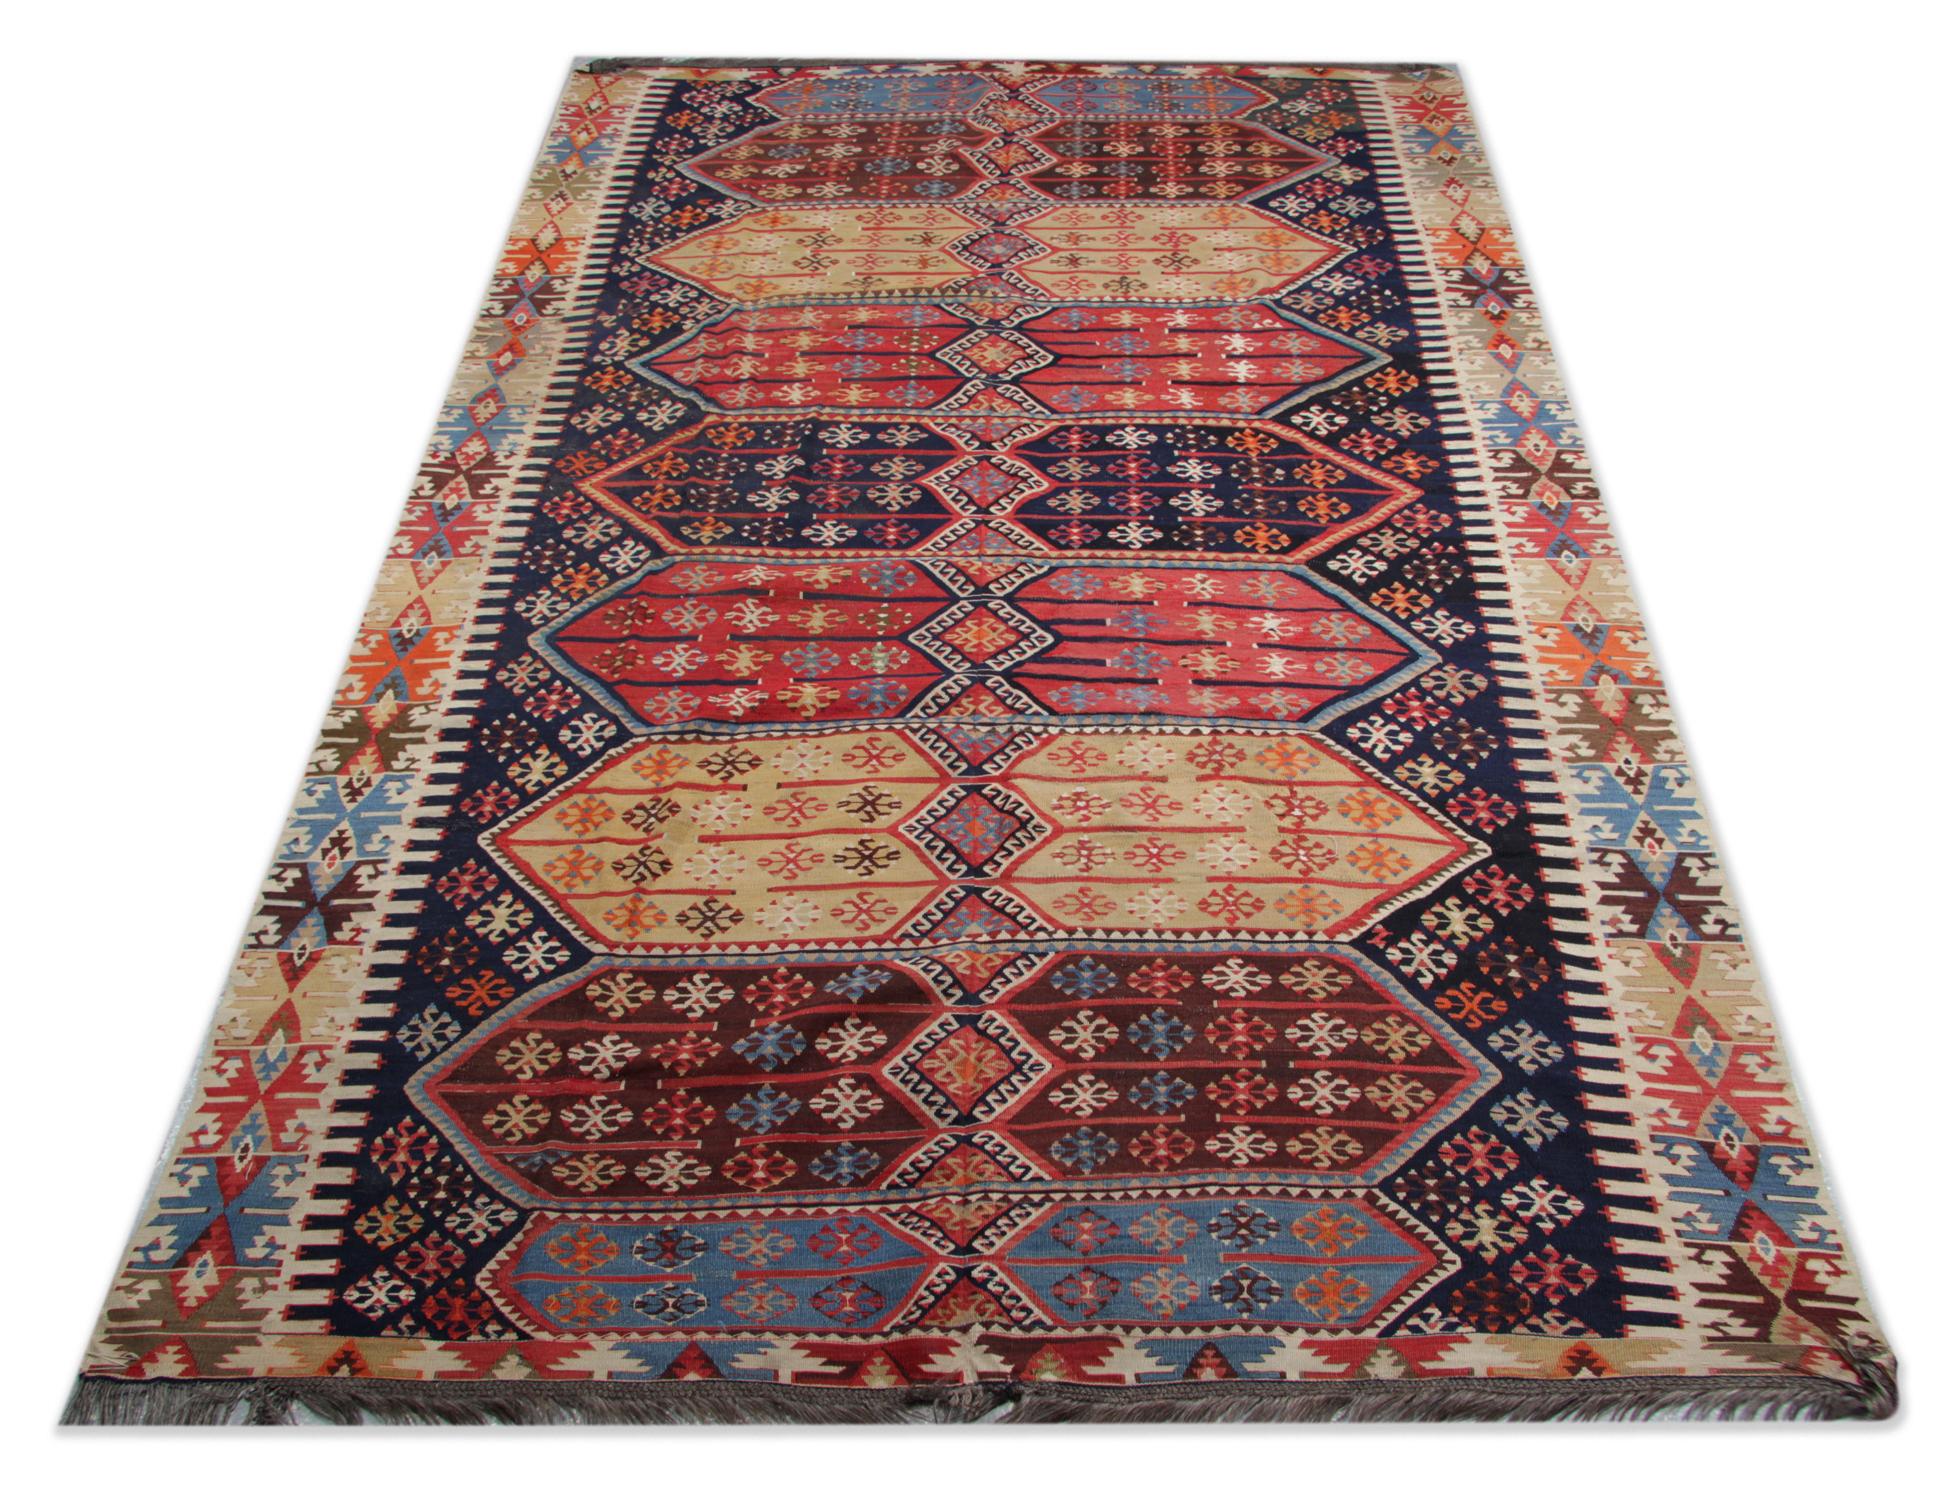 Hand-Knotted Turkish Rugs, Antique Rugs Kilims from Konya, Handmade Carpet Kilim Rug For Sale